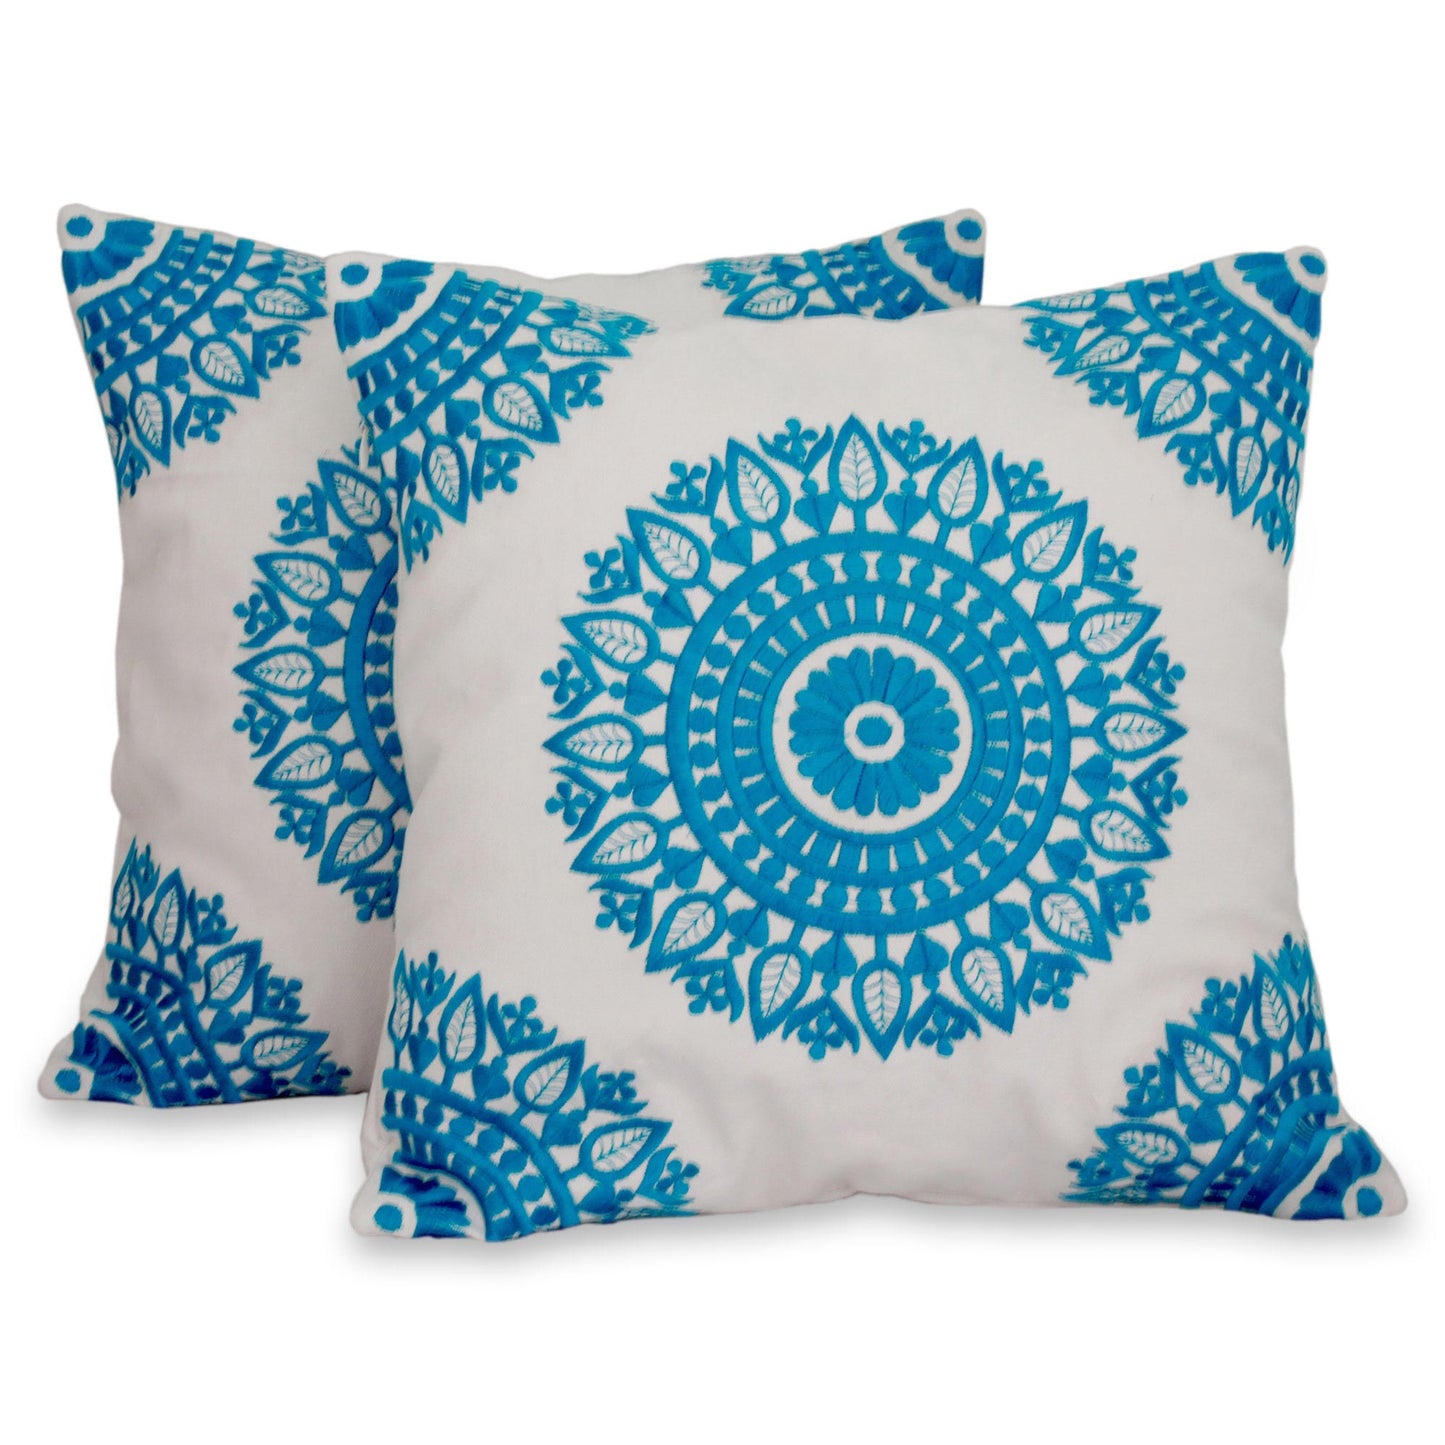 Cool Turquoise Mandalas Embroidered Blue on White Cushion Covers from India (Pair)